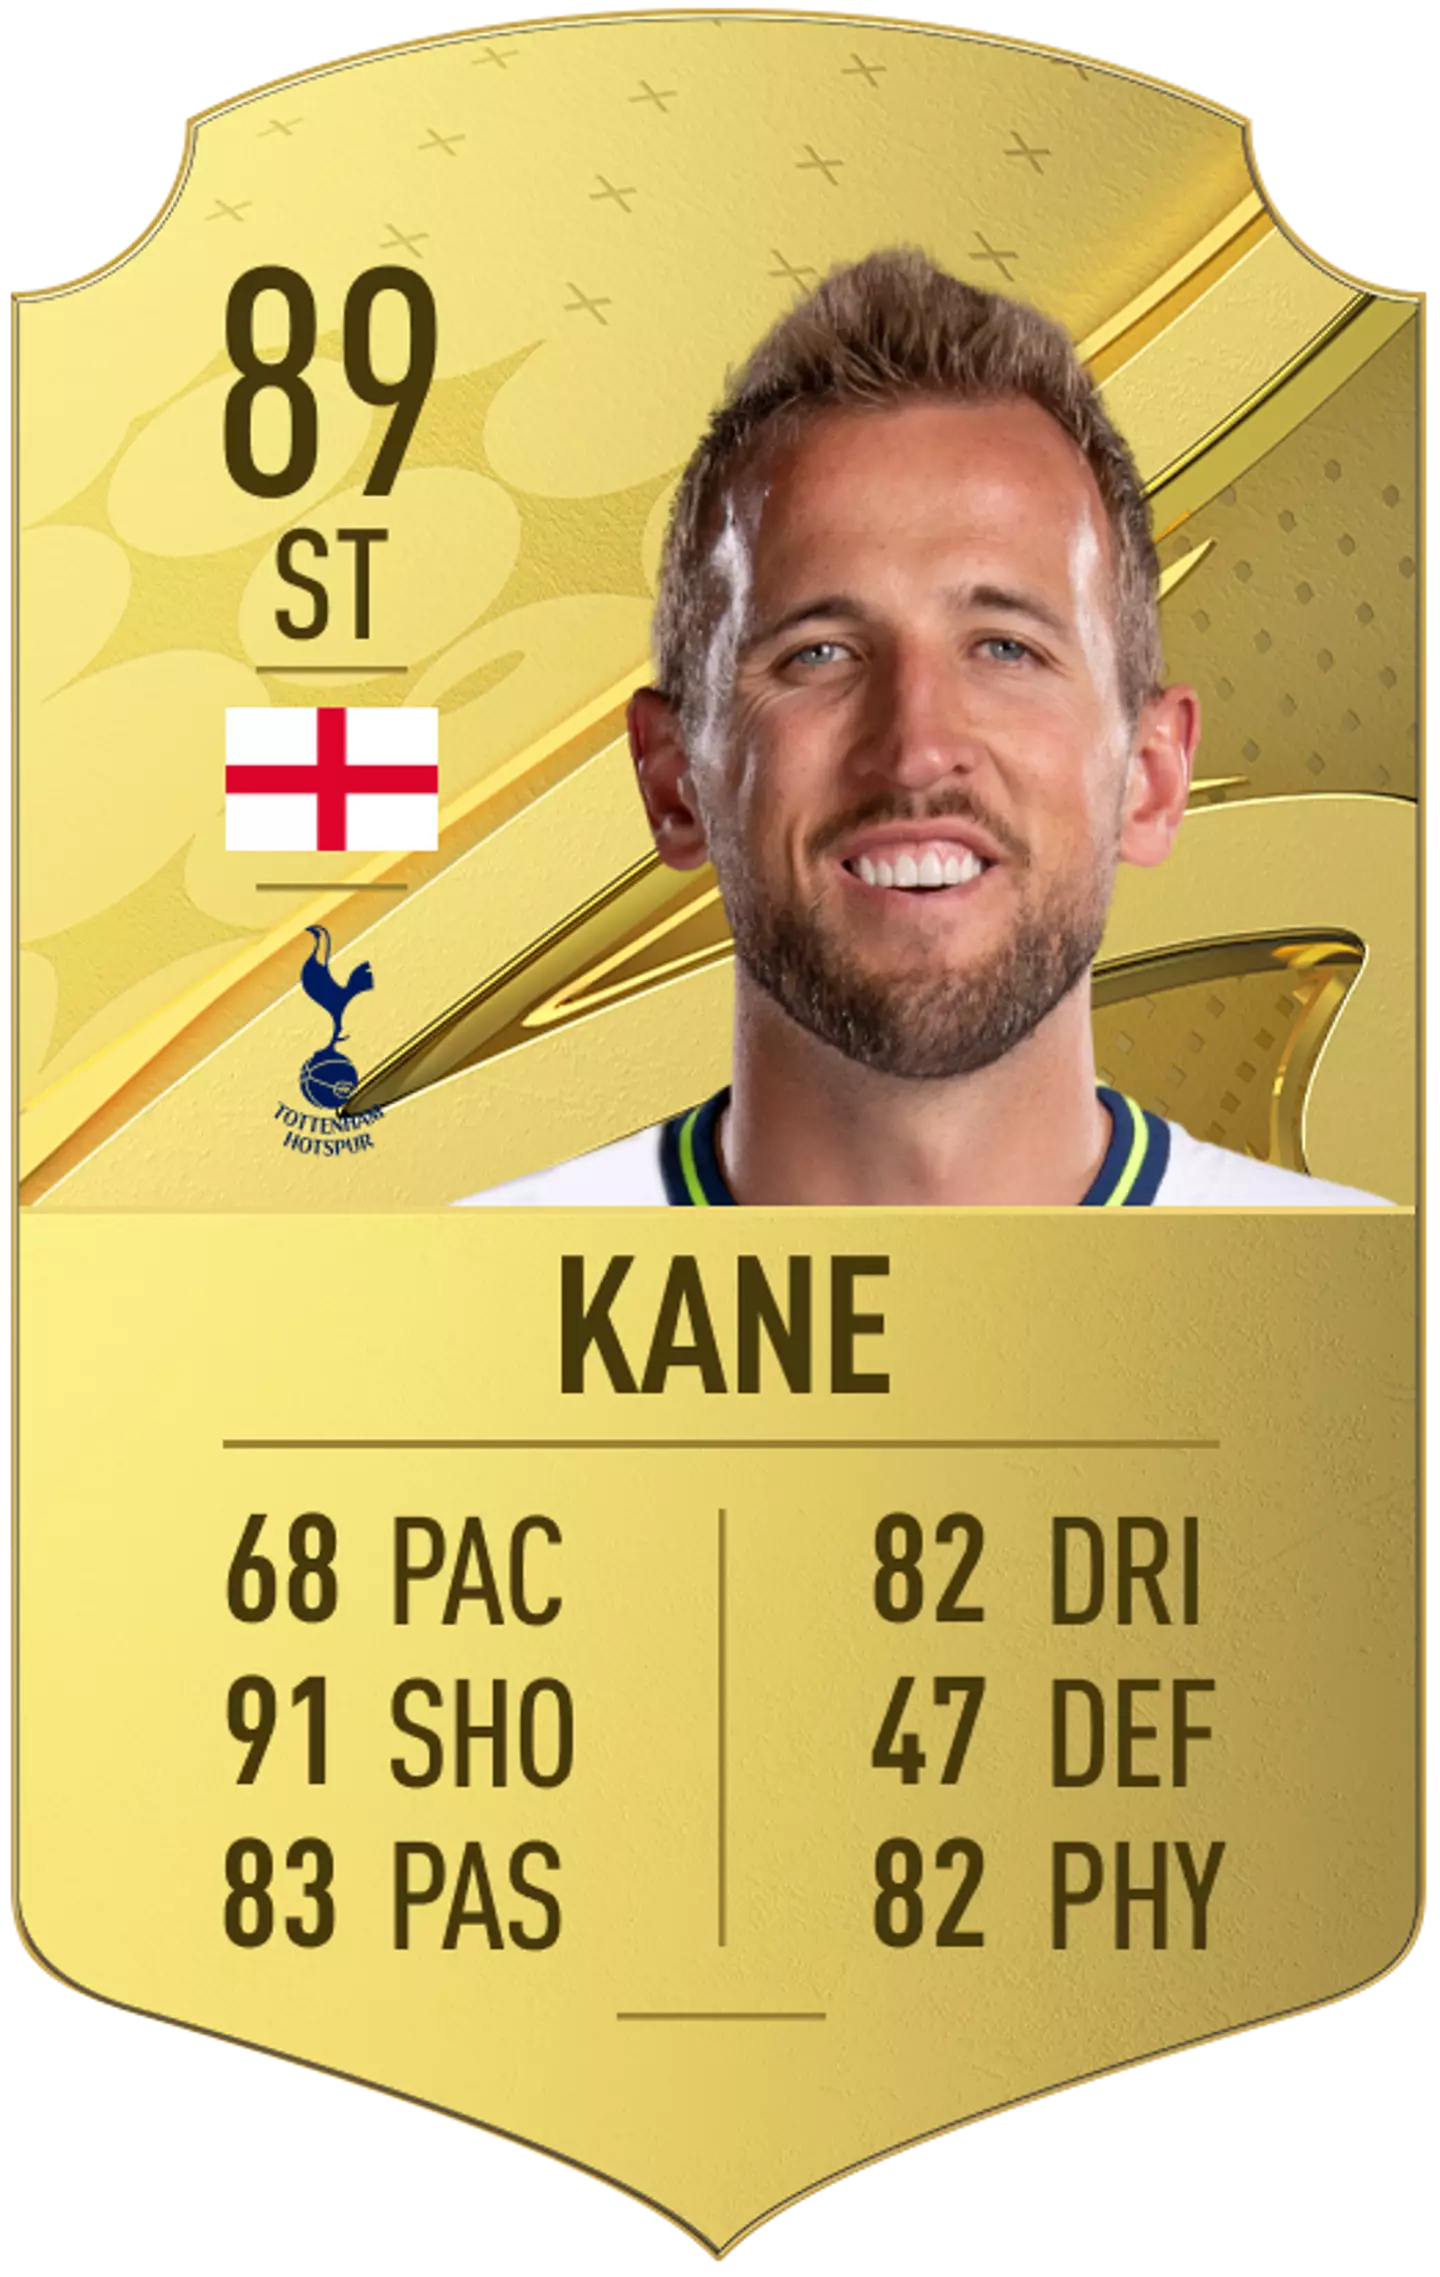 Some fans weren't happy that Kane's passing was rated at just 83.